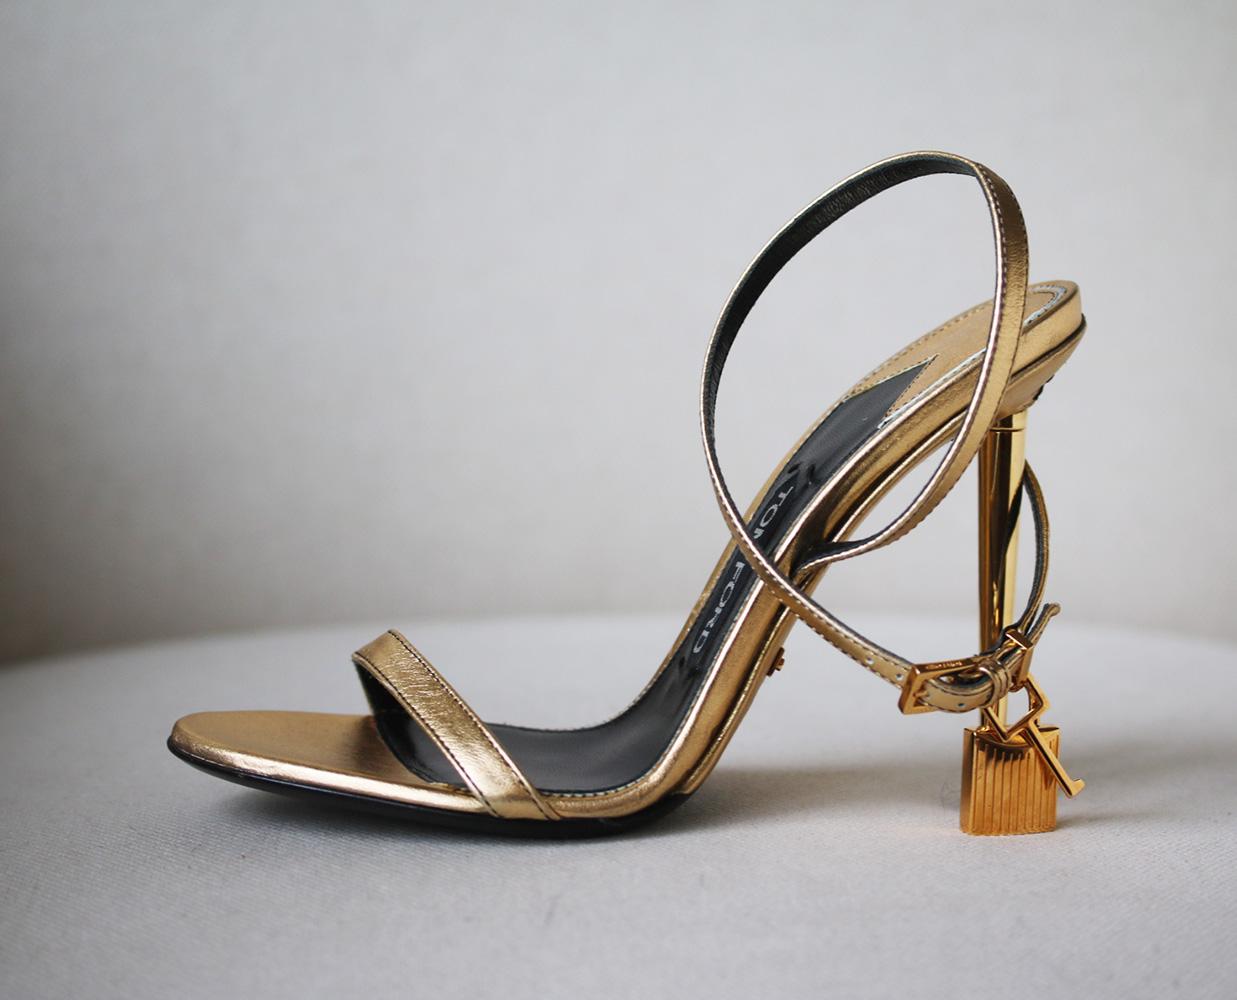 TOM FORD's sand leather sandals are set on a gleaming metallic heel and finished with the label's signature 'Padlock' and key. Heel measures approximately 105mm/ 4 inches. Metallic-gold leather (Calf). Buckle-fastening ankle strap. Designer colour: